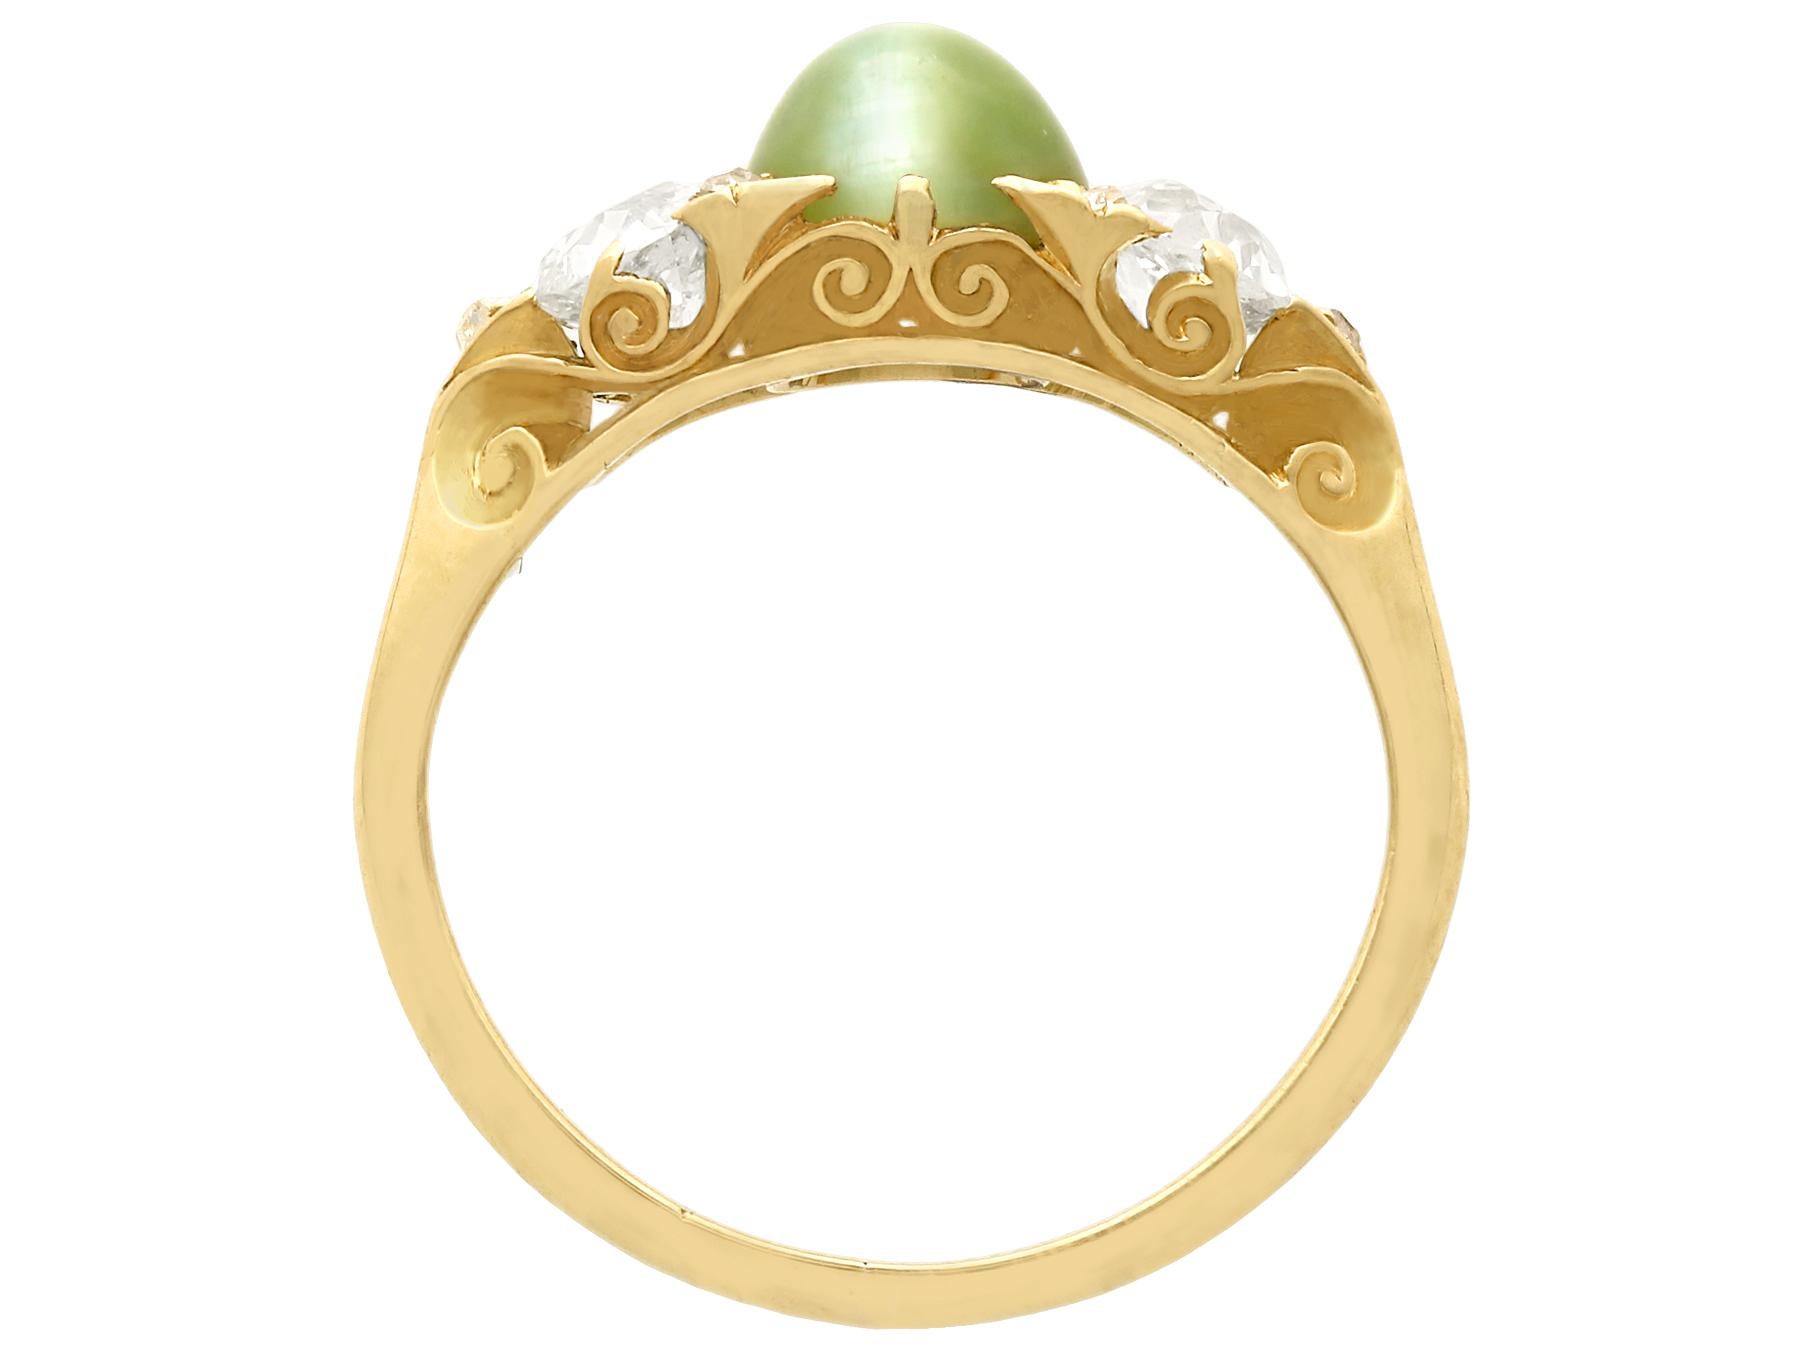 Antique Victorian 1.35 Carat Chrysoberyl and Diamond Yellow Gold Cocktail Ring In Excellent Condition For Sale In Jesmond, Newcastle Upon Tyne